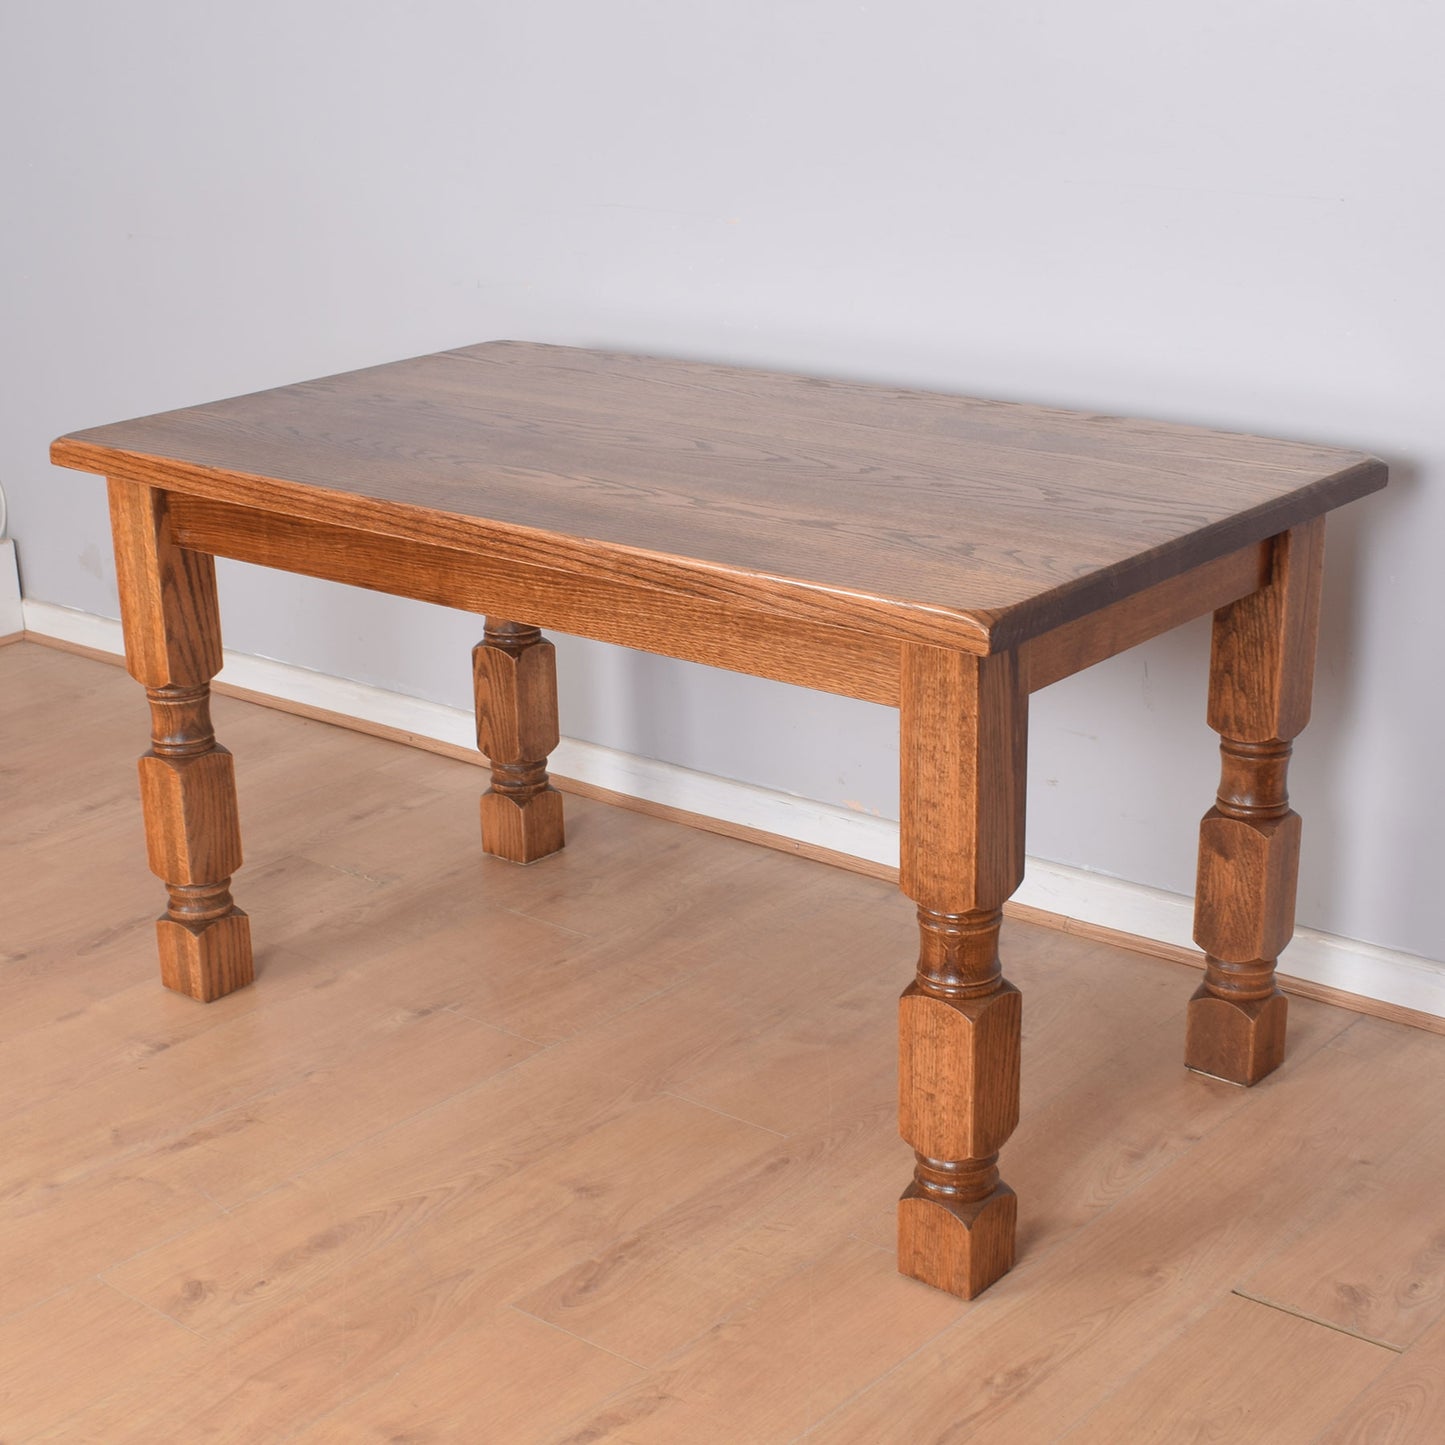 Dutch Oak Dining Table with Four Chairs